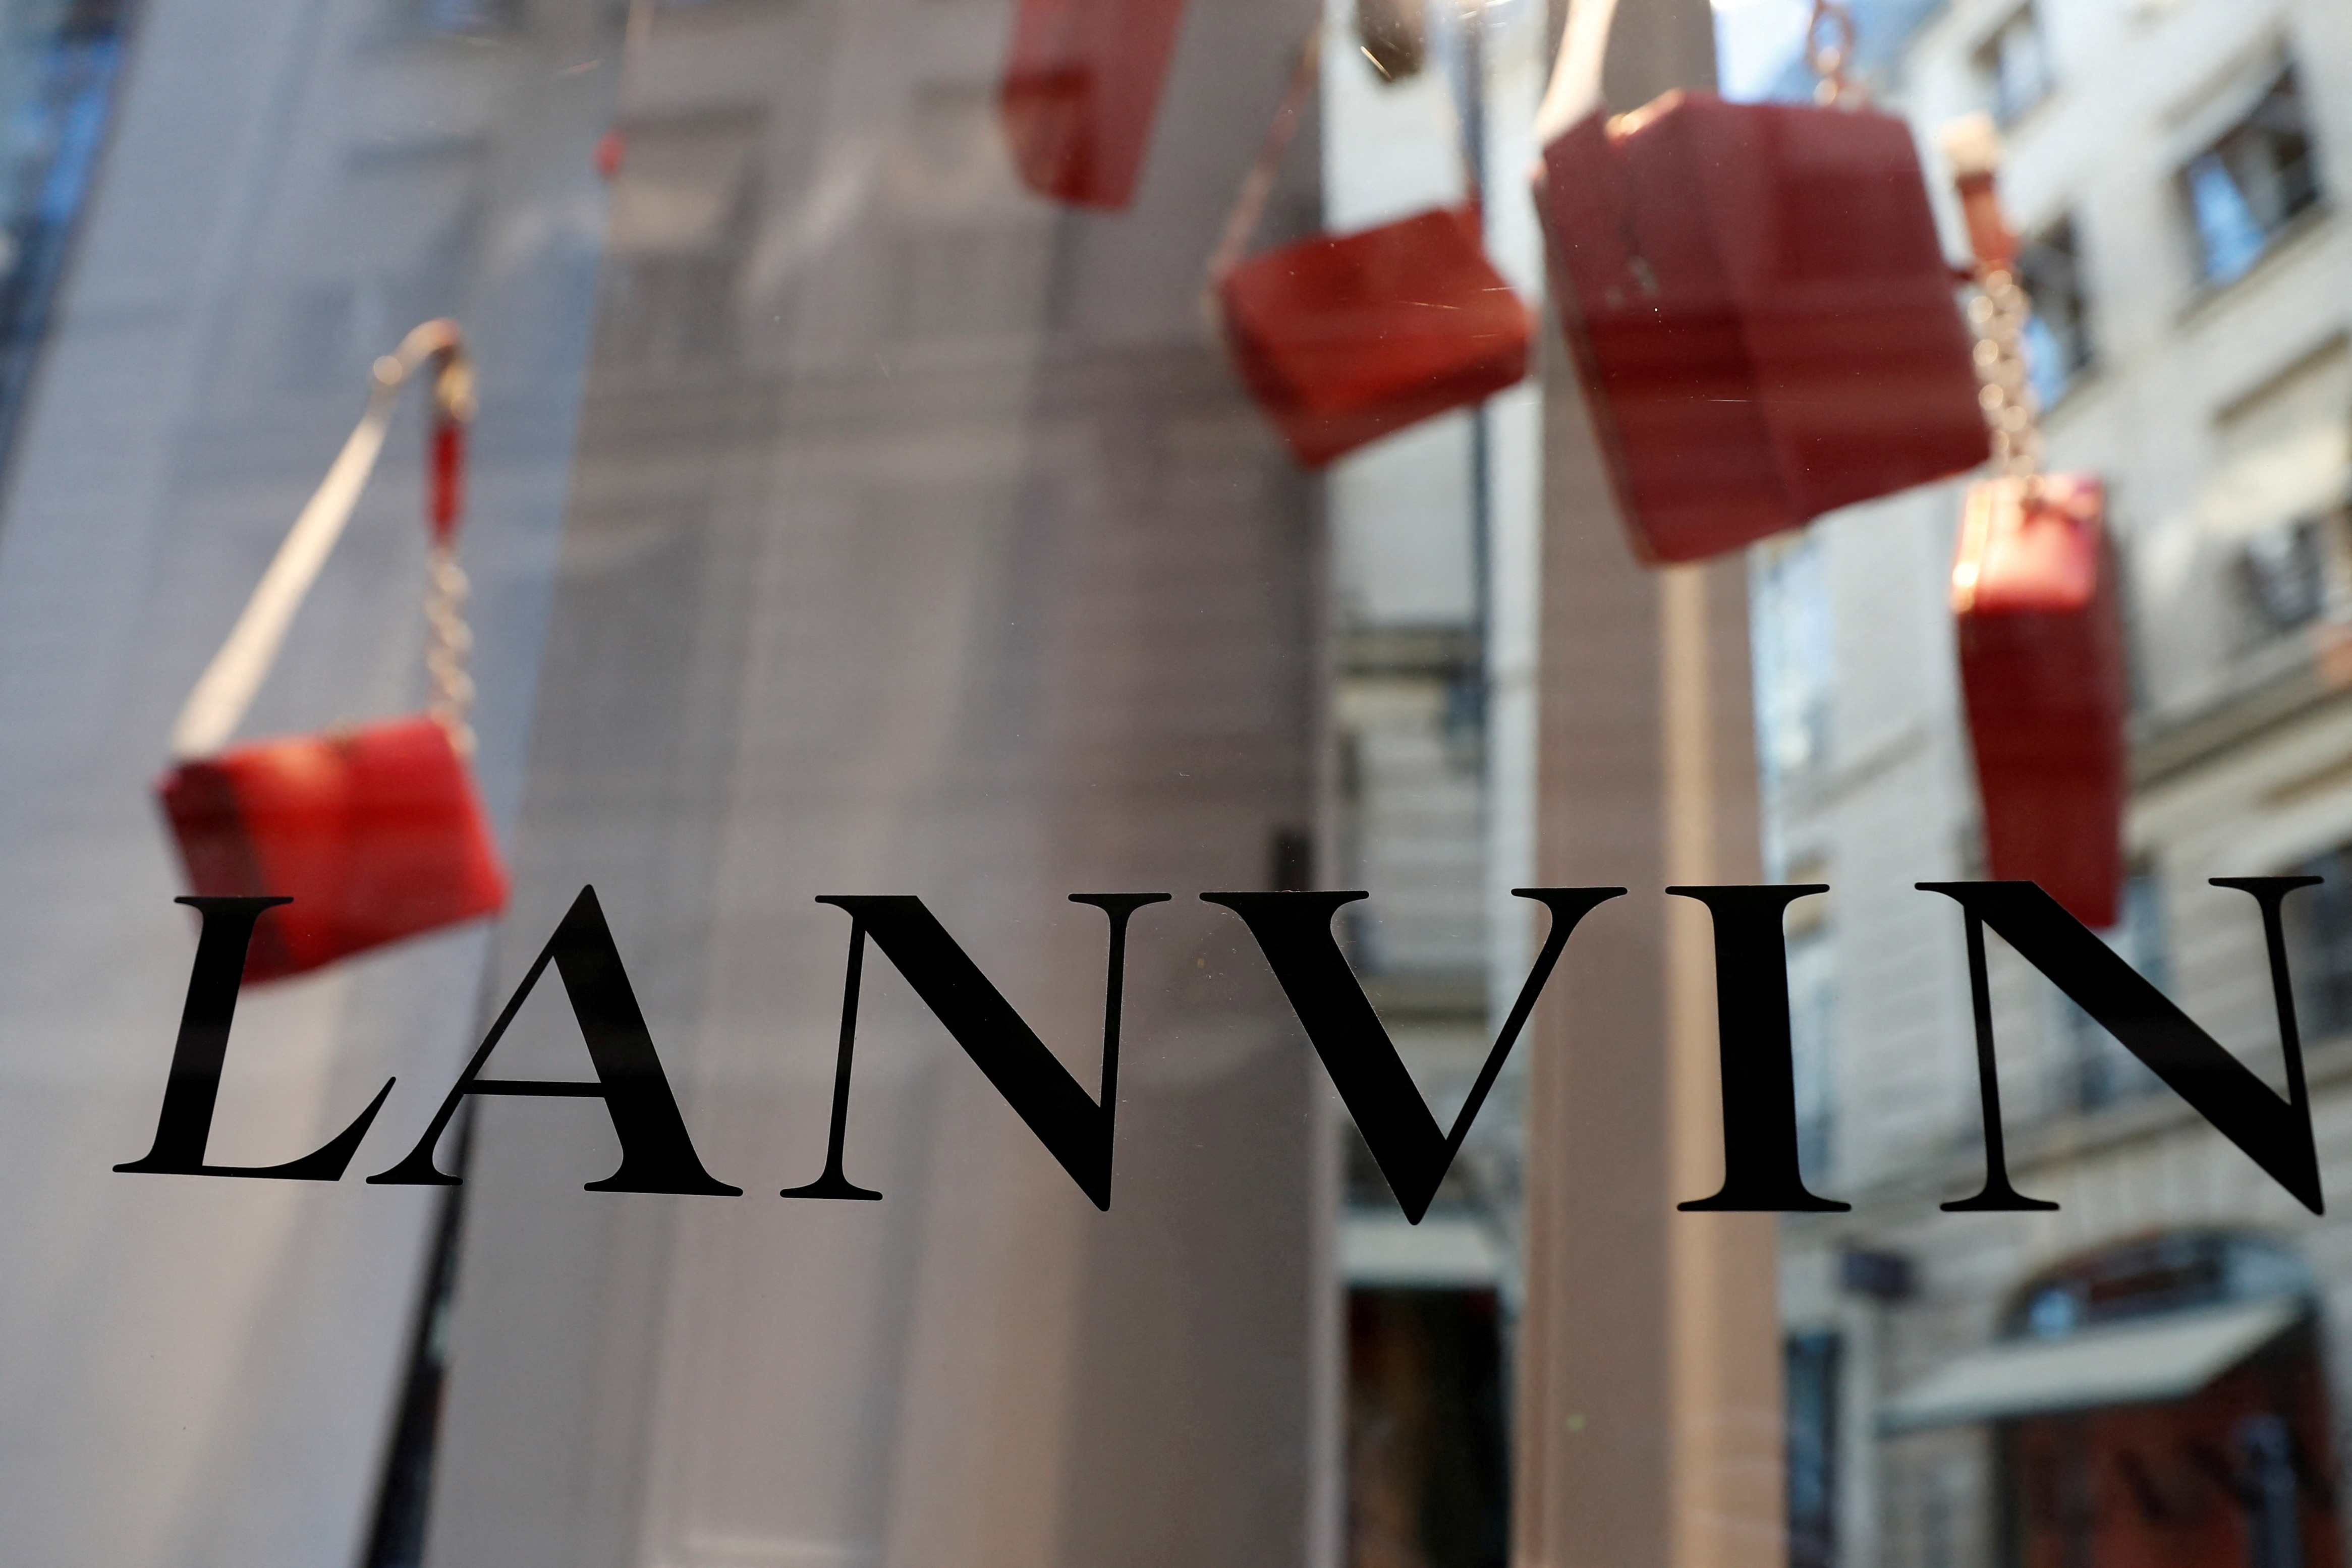 The logo of Lanvin, luxury clothing and accessories, is seen on a French fashion house Lanvin store window in Paris